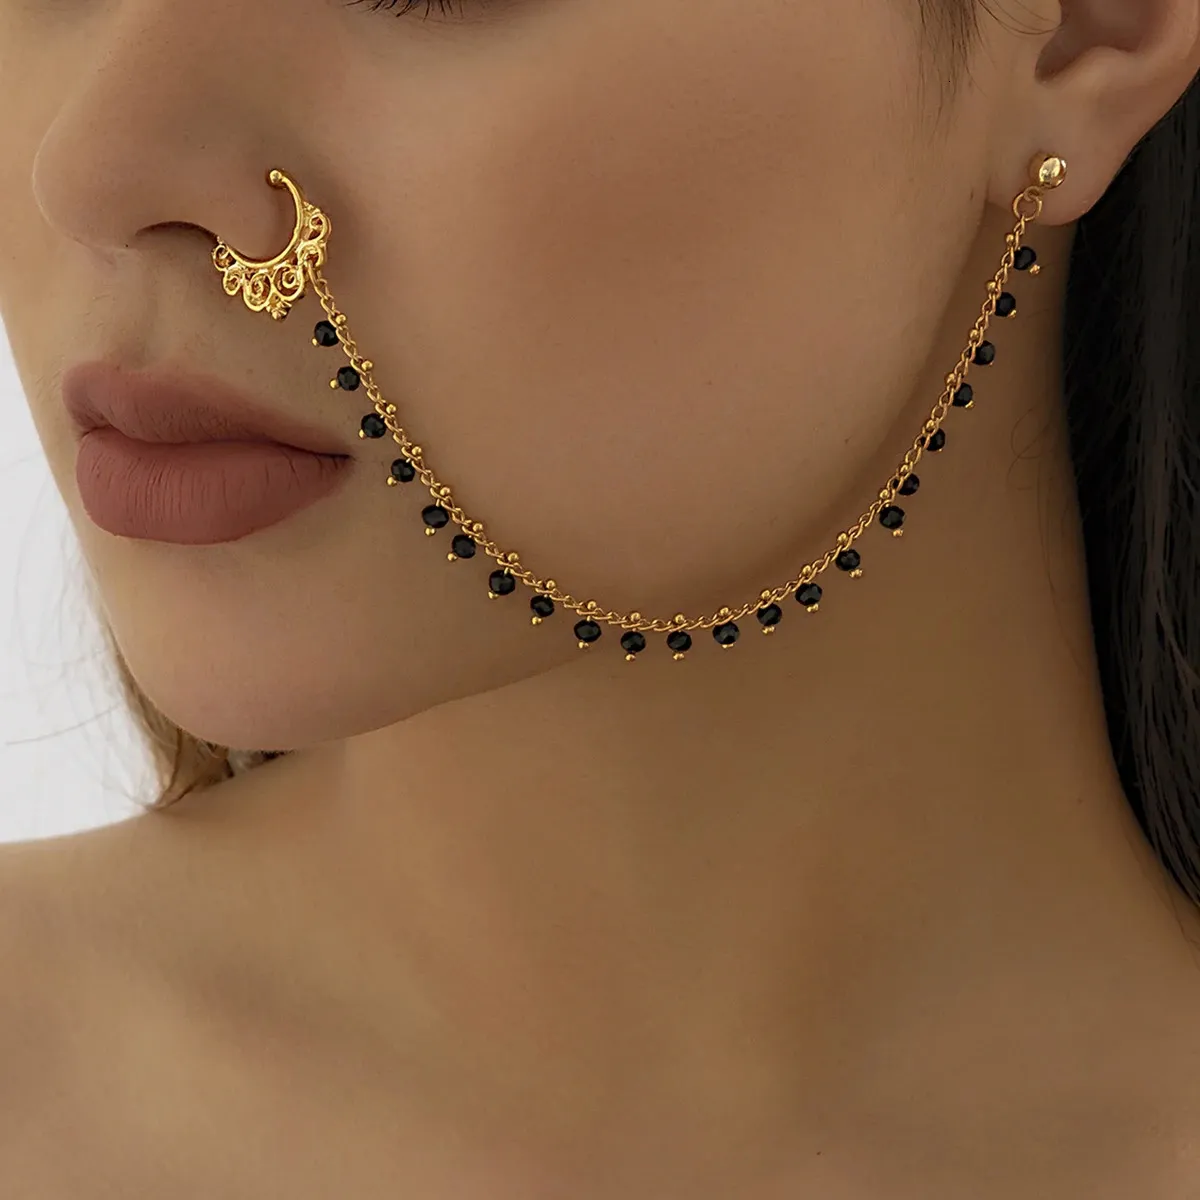 Small Gold Nose Ring Hoop for Women Tiny Thin 14K Gold Filled Nose Piercing  Hoo | eBay